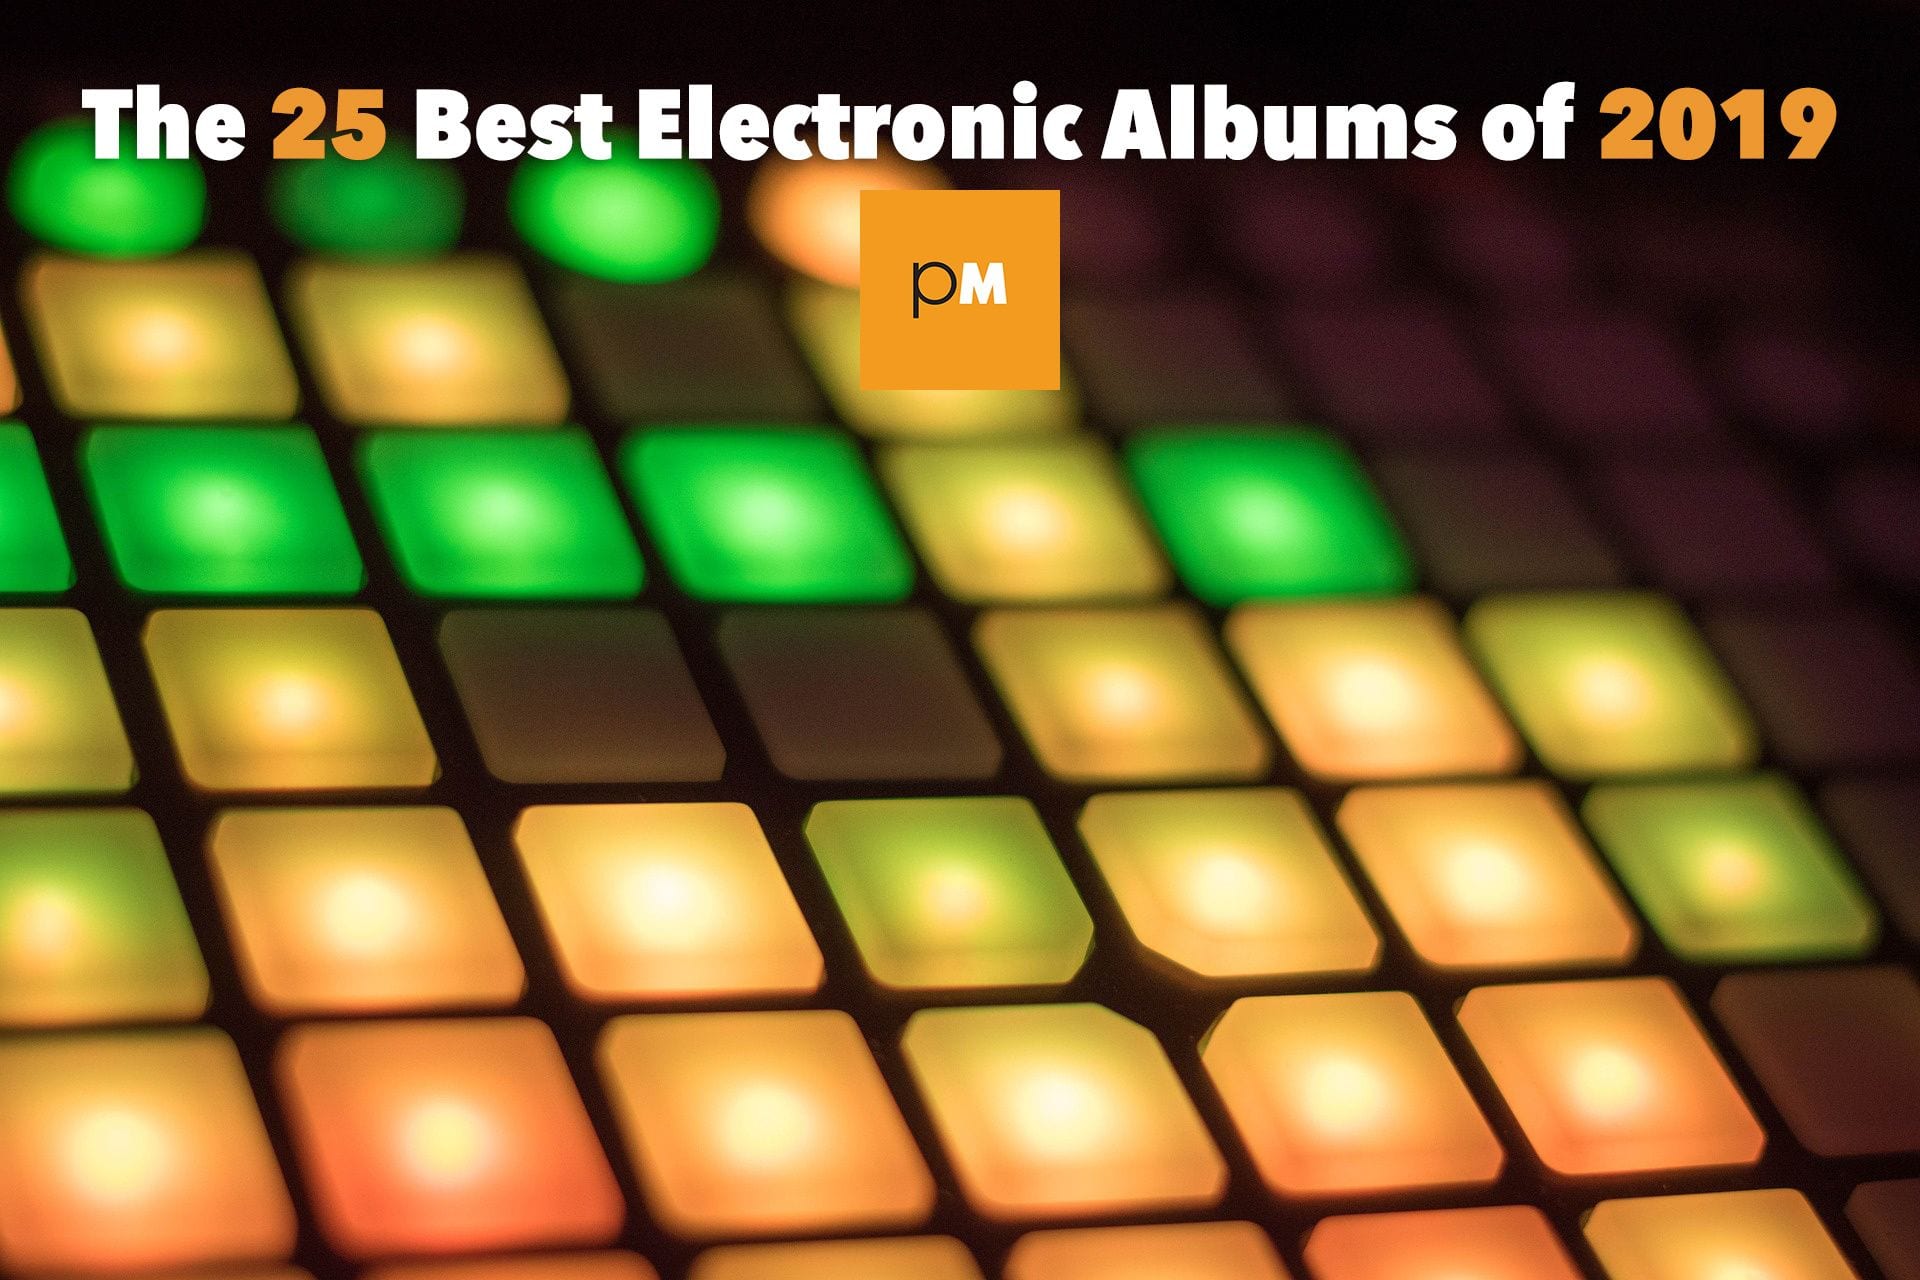 The 25 Best Electronic Albums of 2019